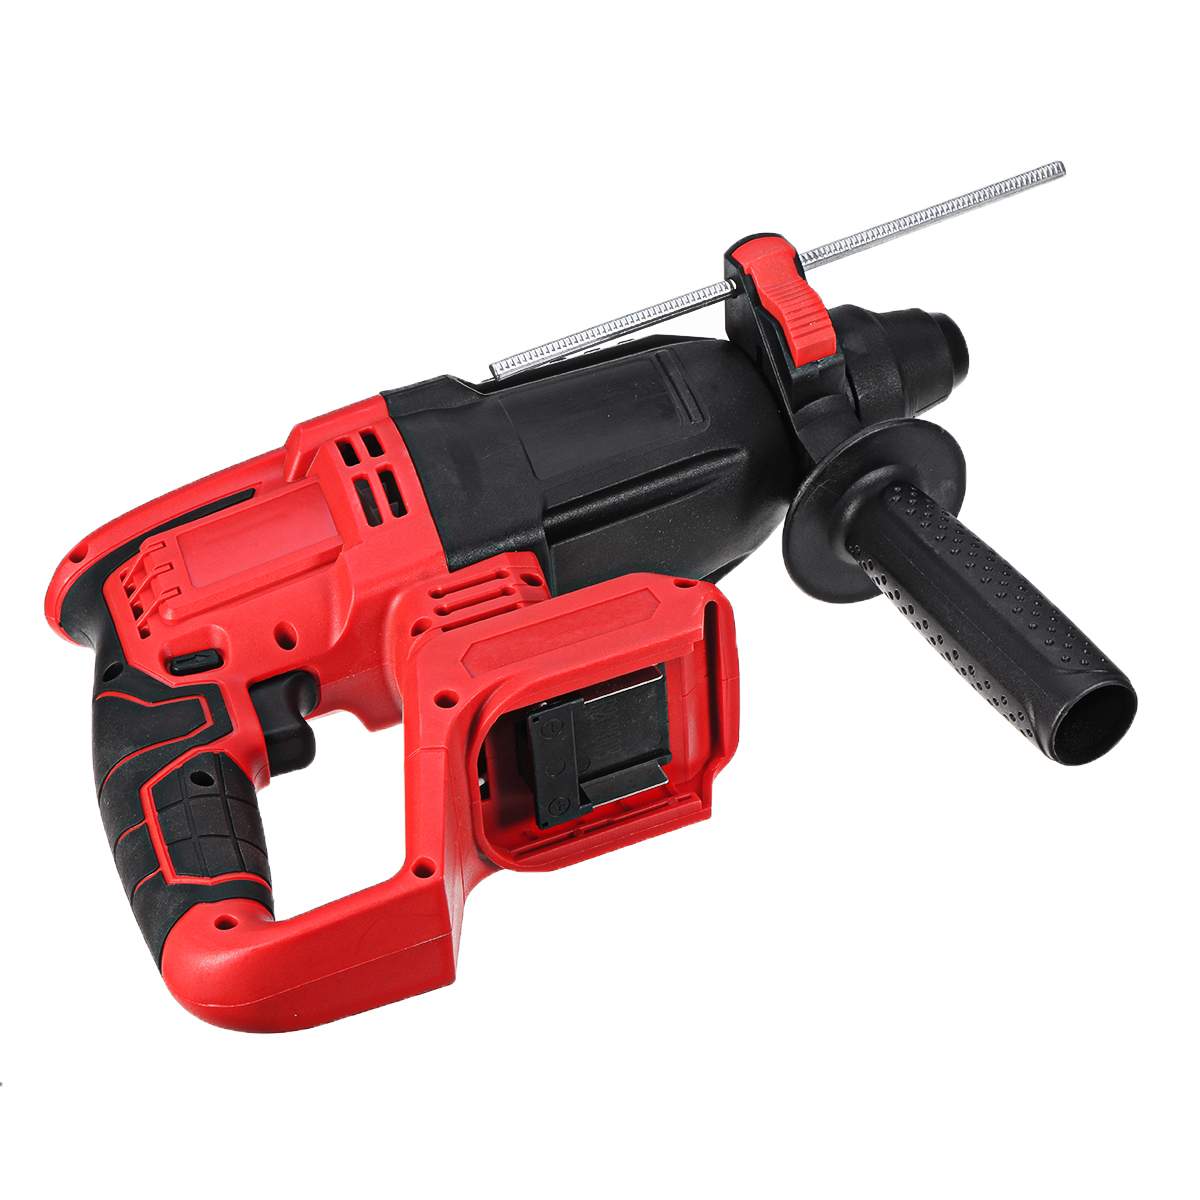 Brushless Electric Rotary Hammer Rechargeable Multifunction Electric Hammer Impact Power Drill Tool for 198Vf Makita Battery